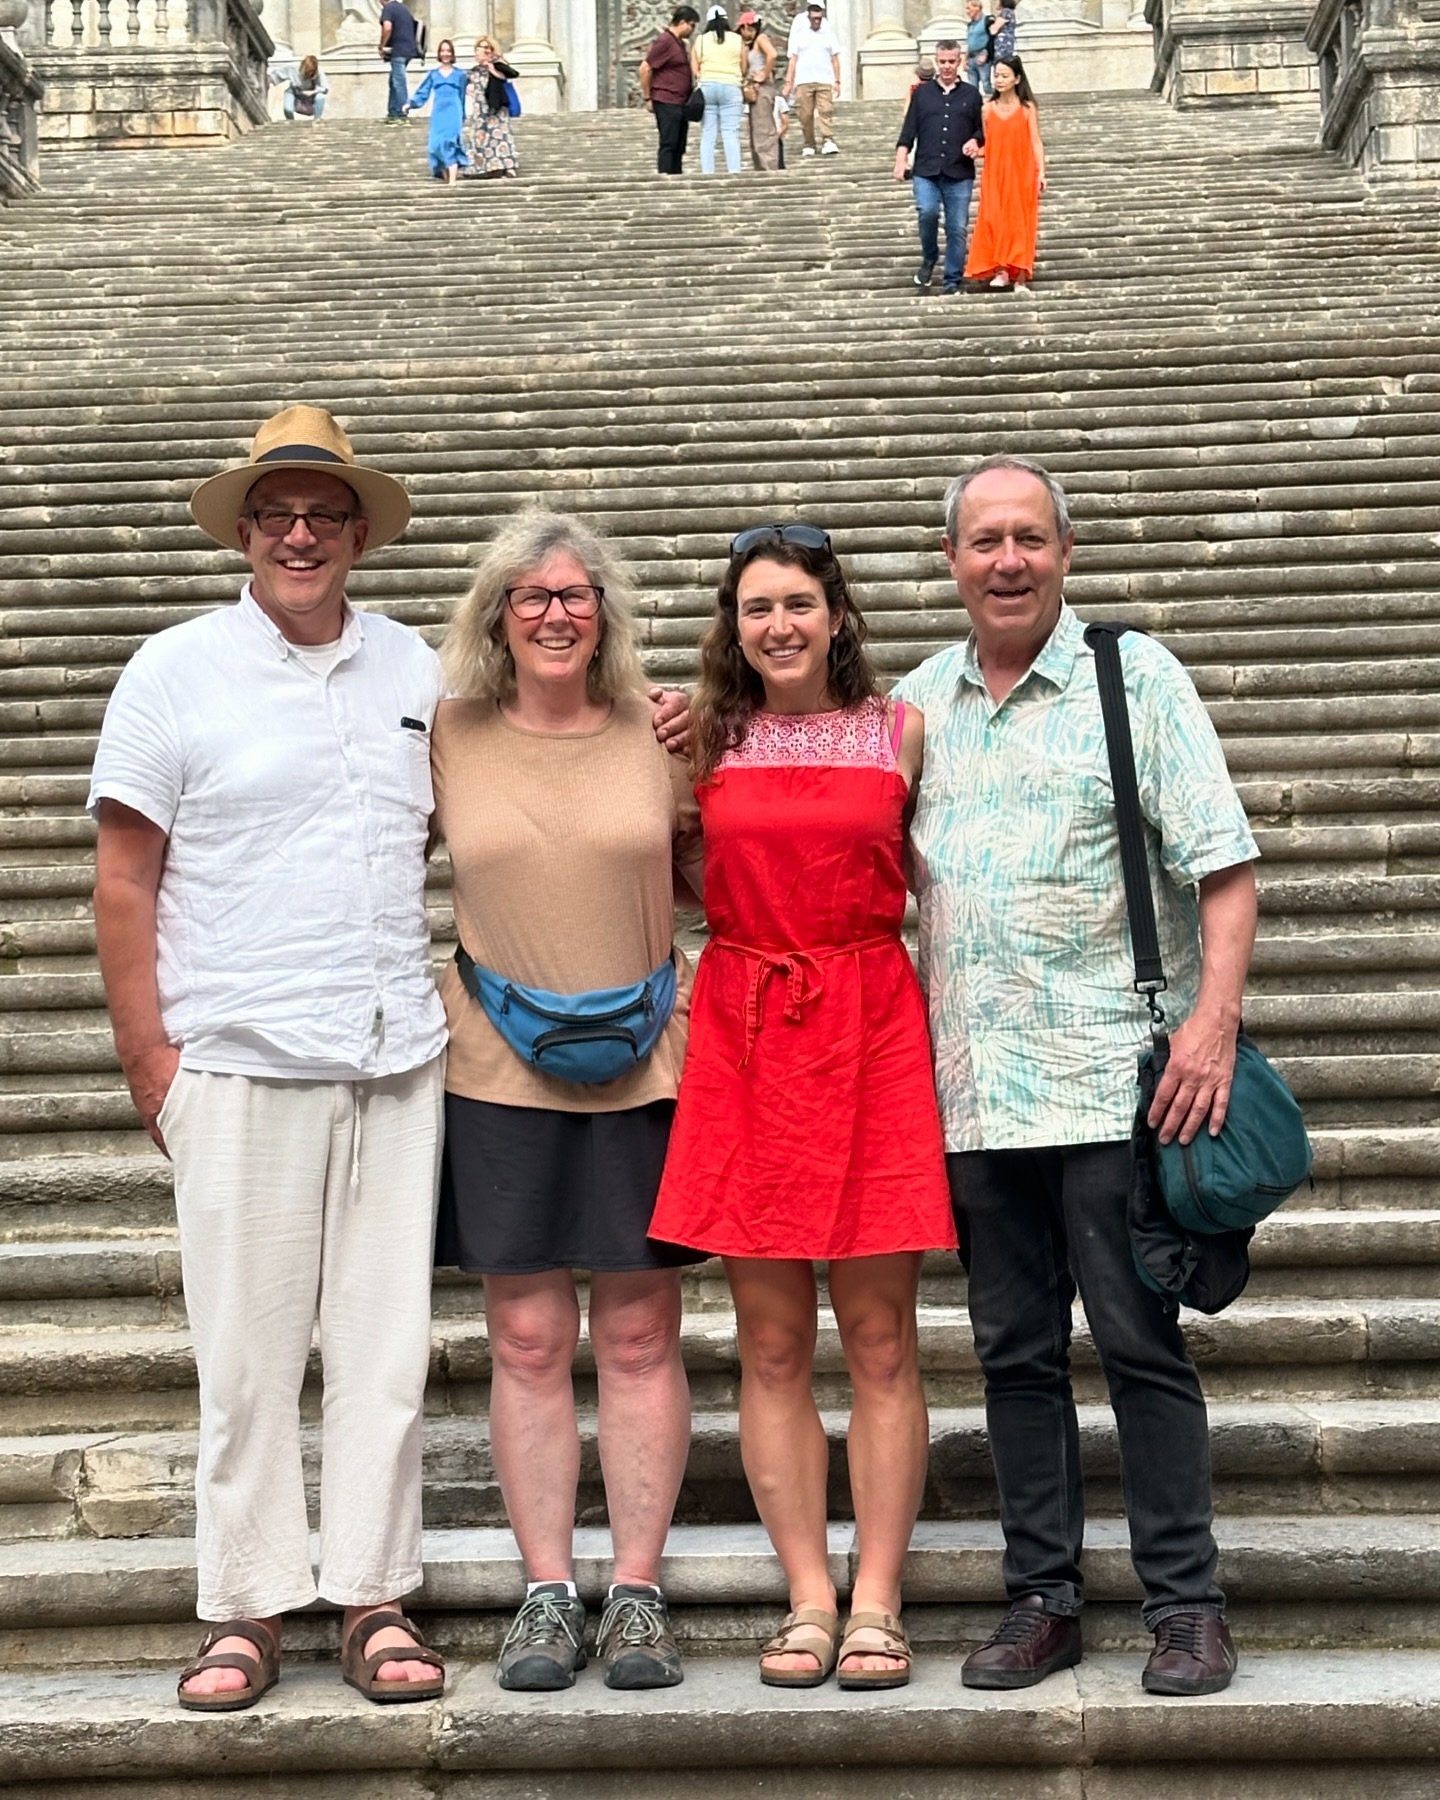 Feeling incredibly grateful to have spent a week showing my parents Costa Brava on their first trip to Spain 🇪🇸. They made the long journey from Alaska to be here with me. For many of us Non-Europeans, living our dream often means being far from ou